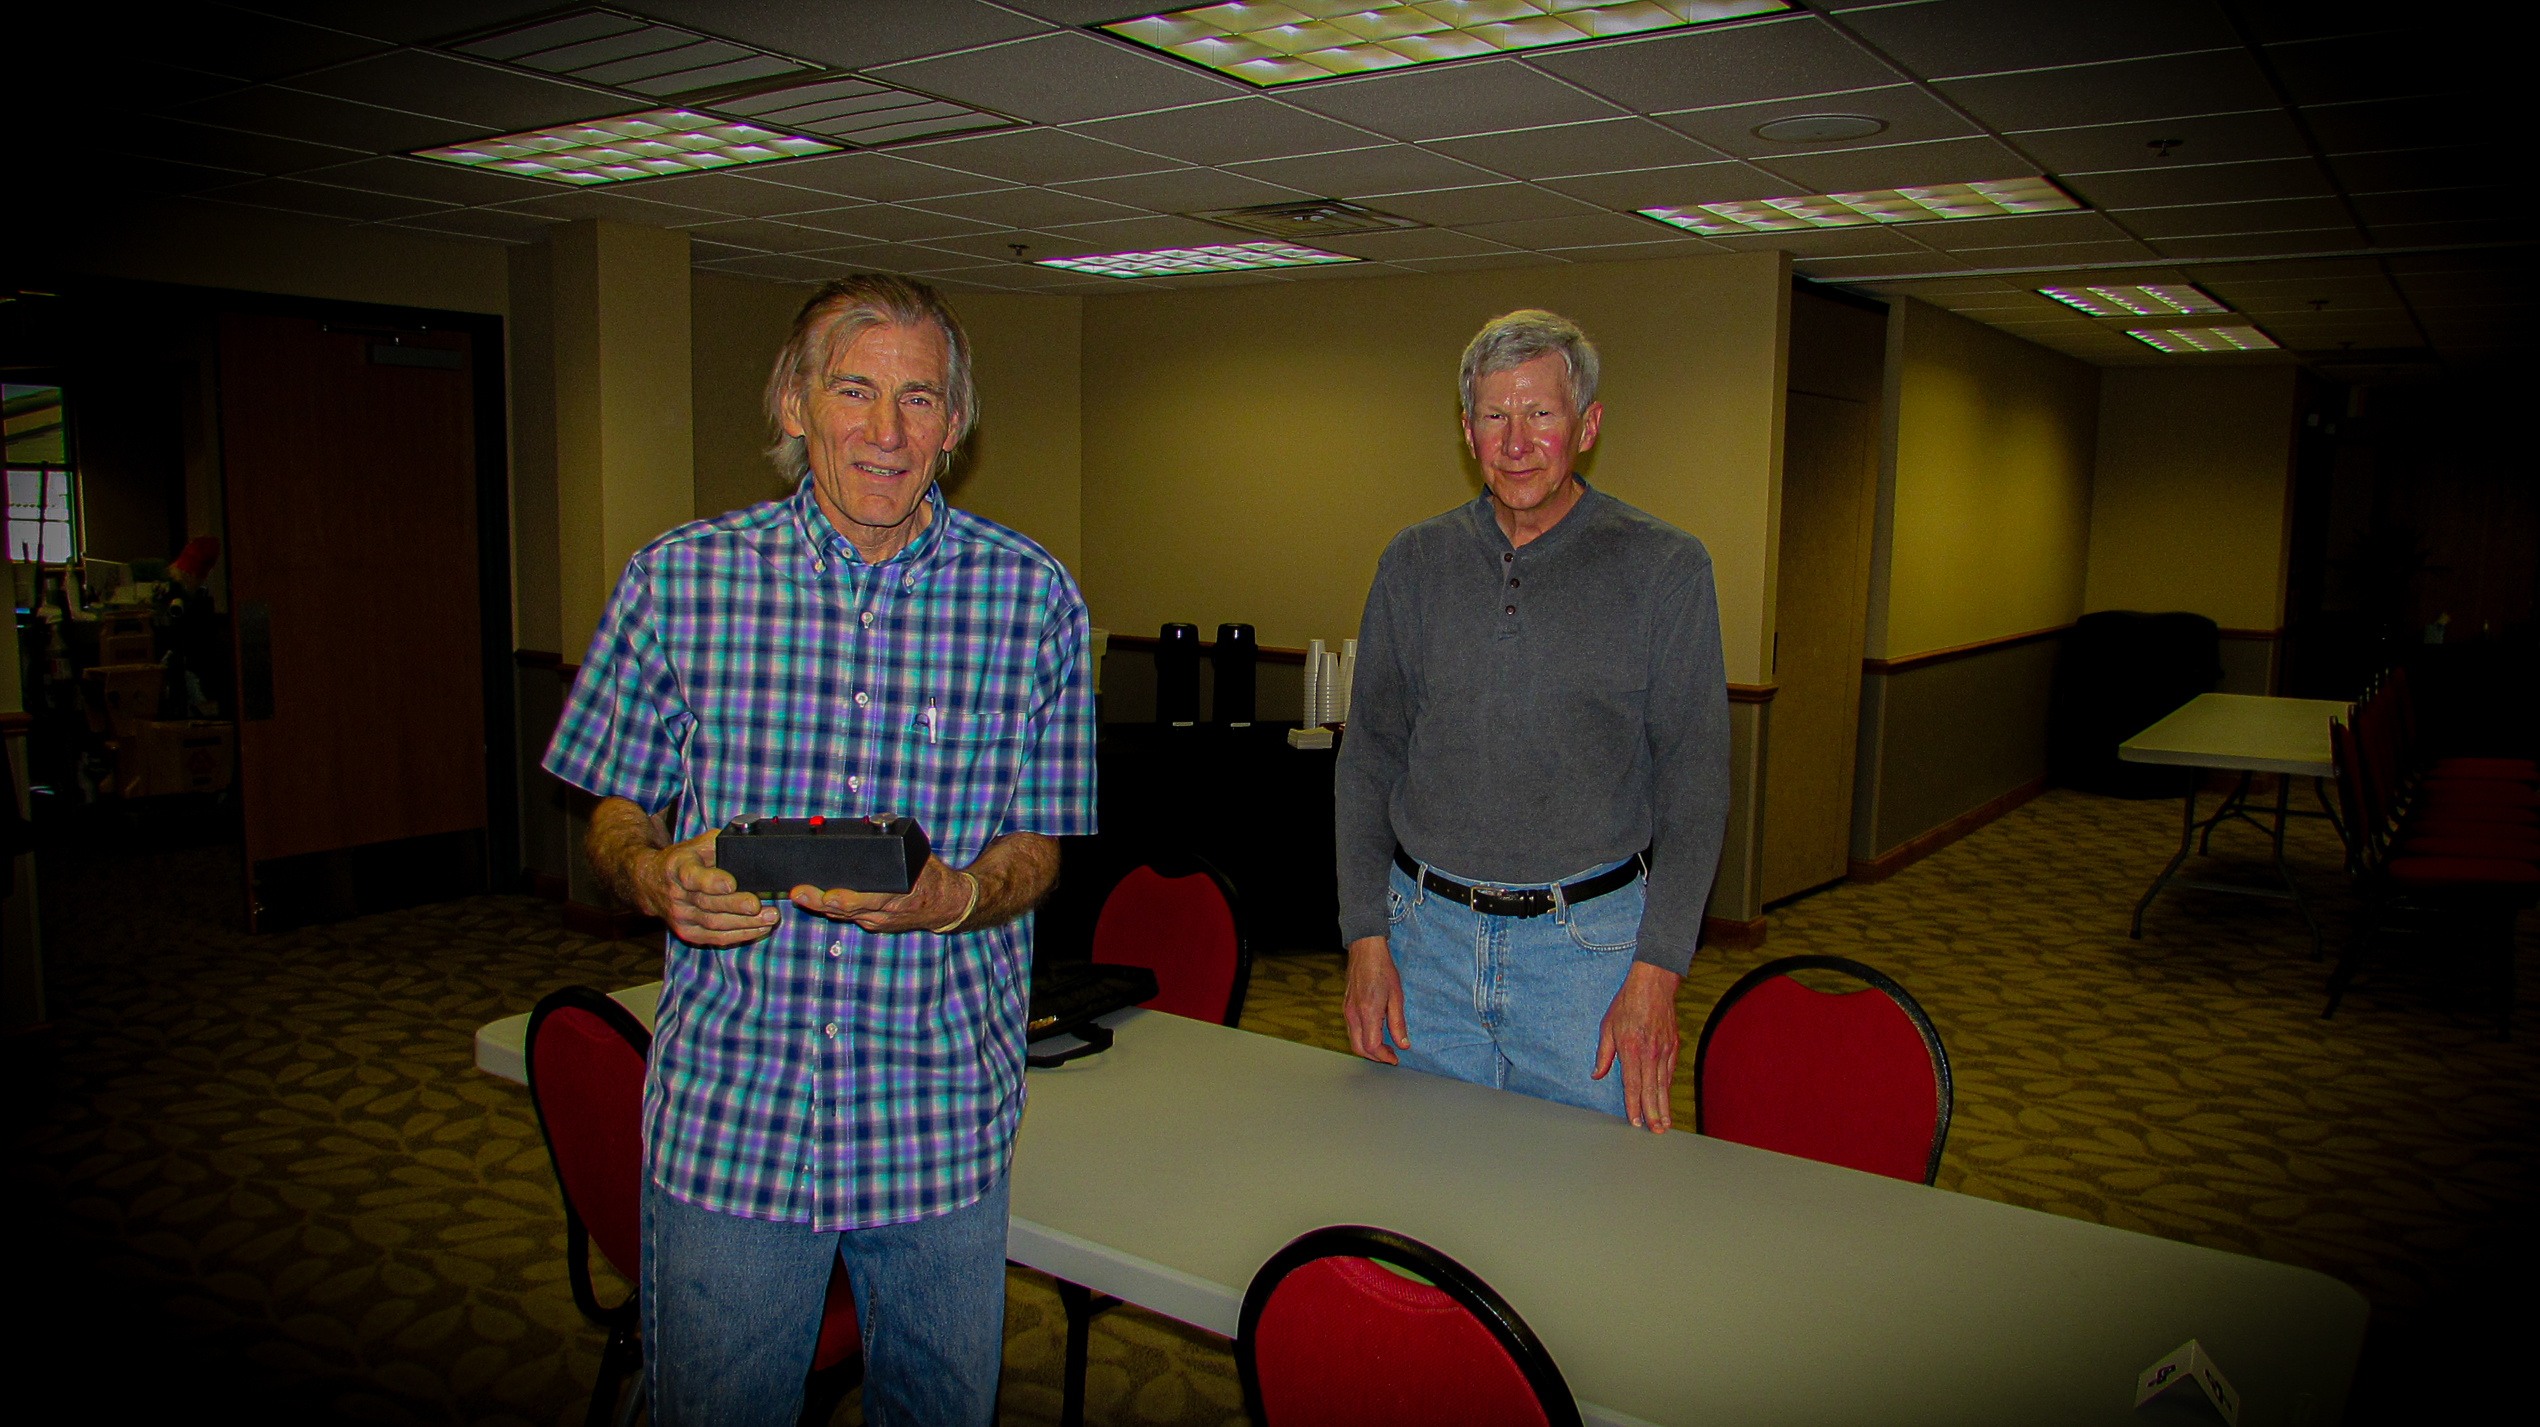 Texans Russ Heise (left) and Jim Kirk (right) arrived early.  Not pictured is Carol Heise who rode with them.  Russ is a Tarrant Chess Team member and Captain of the Texas Military Chess Auxiliary All Stars.  This is his 4th RRSO.  This is Jim Kirk's 2nd RRSO.  Photo by Mike Tubbs.